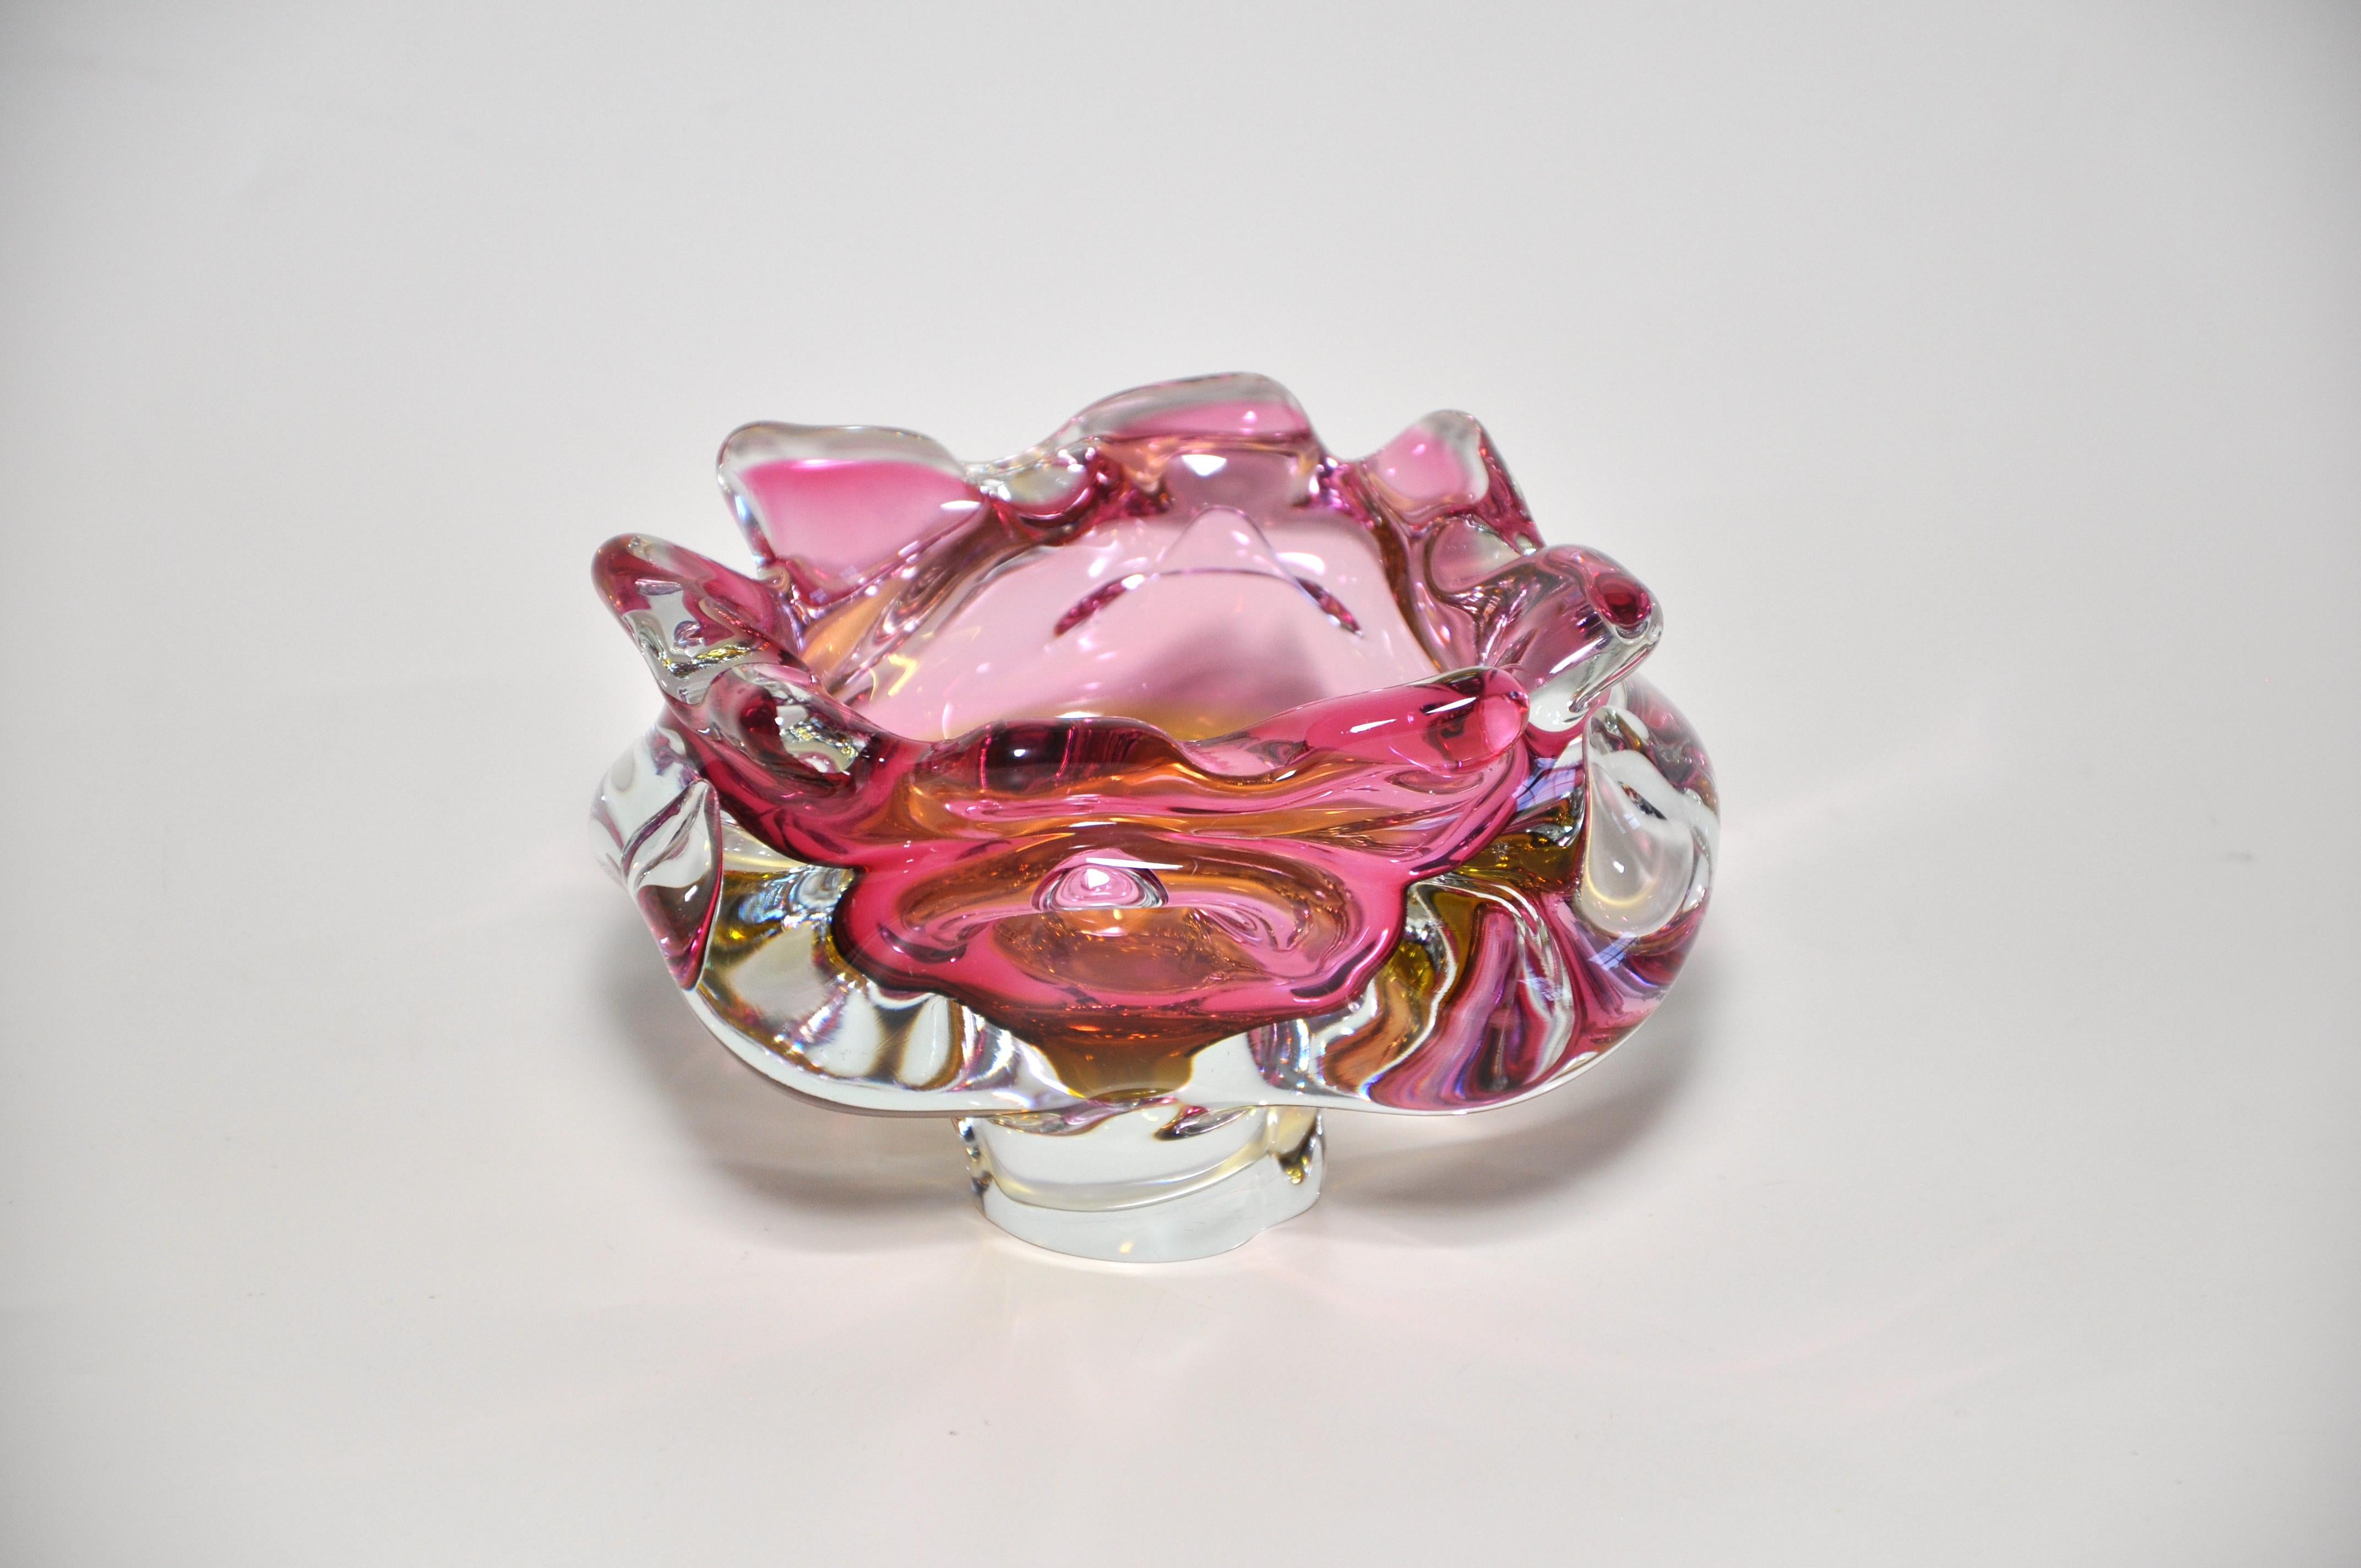 Title:
Stunning Vintage Pink Yellow Art Glass Bowl Italian 

Description:
A stunning vintage piece of art glass in a strong molten pink blending into a sunny yellow hue. This piece is wonderful as it would look great matched with antique or